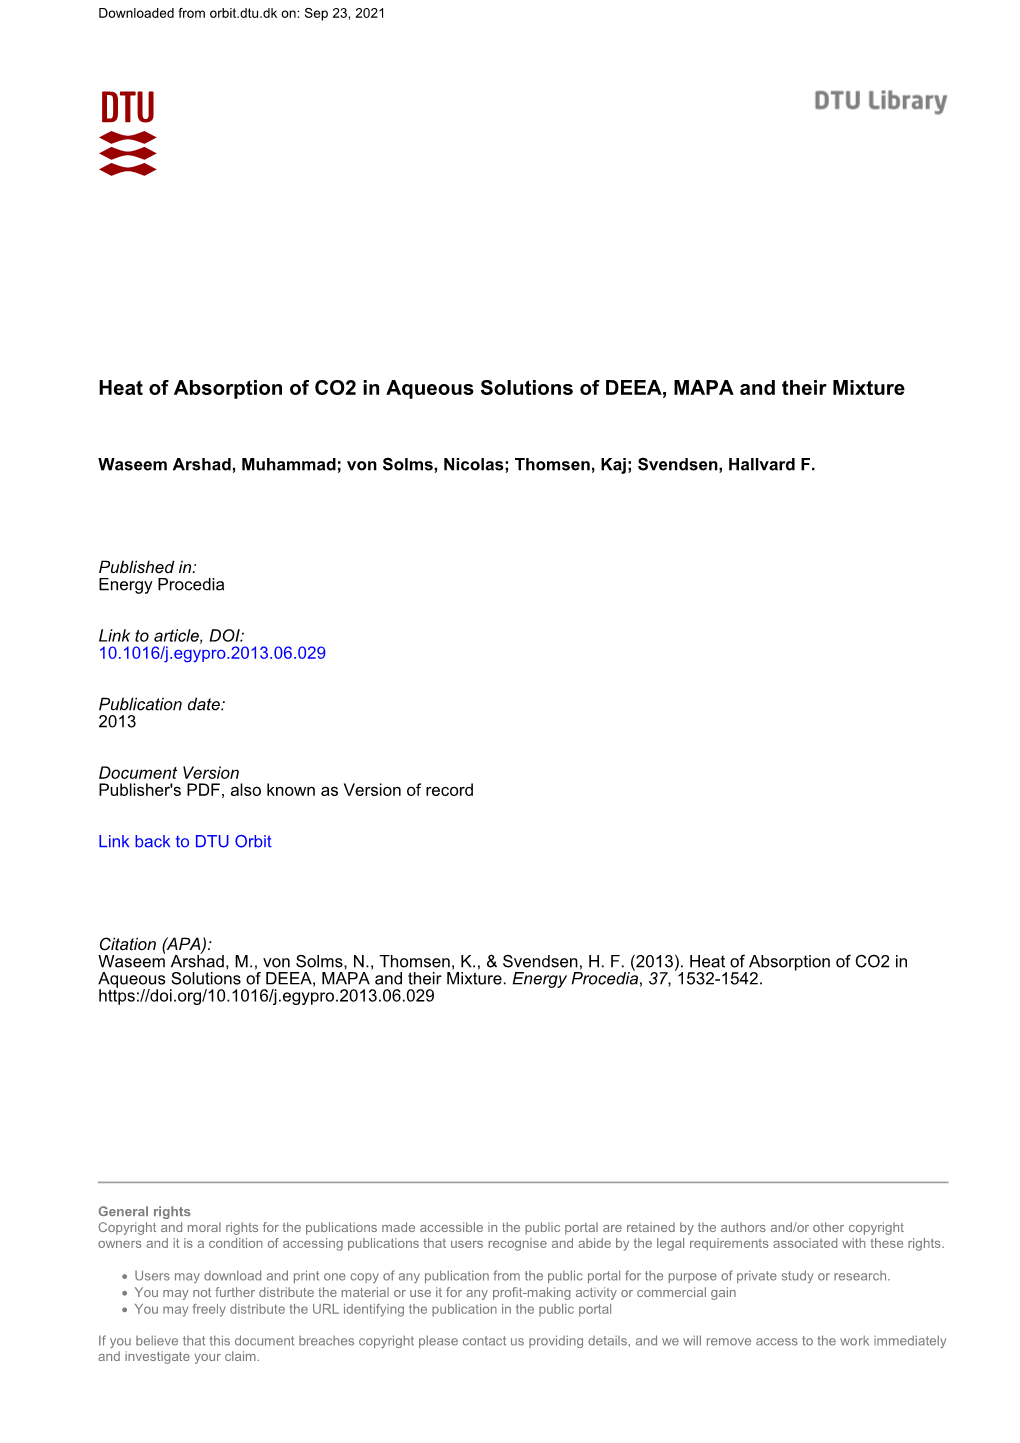 Heat of Absorption of CO2 in Aqueous Solutions of DEEA, MAPA and Their Mixture